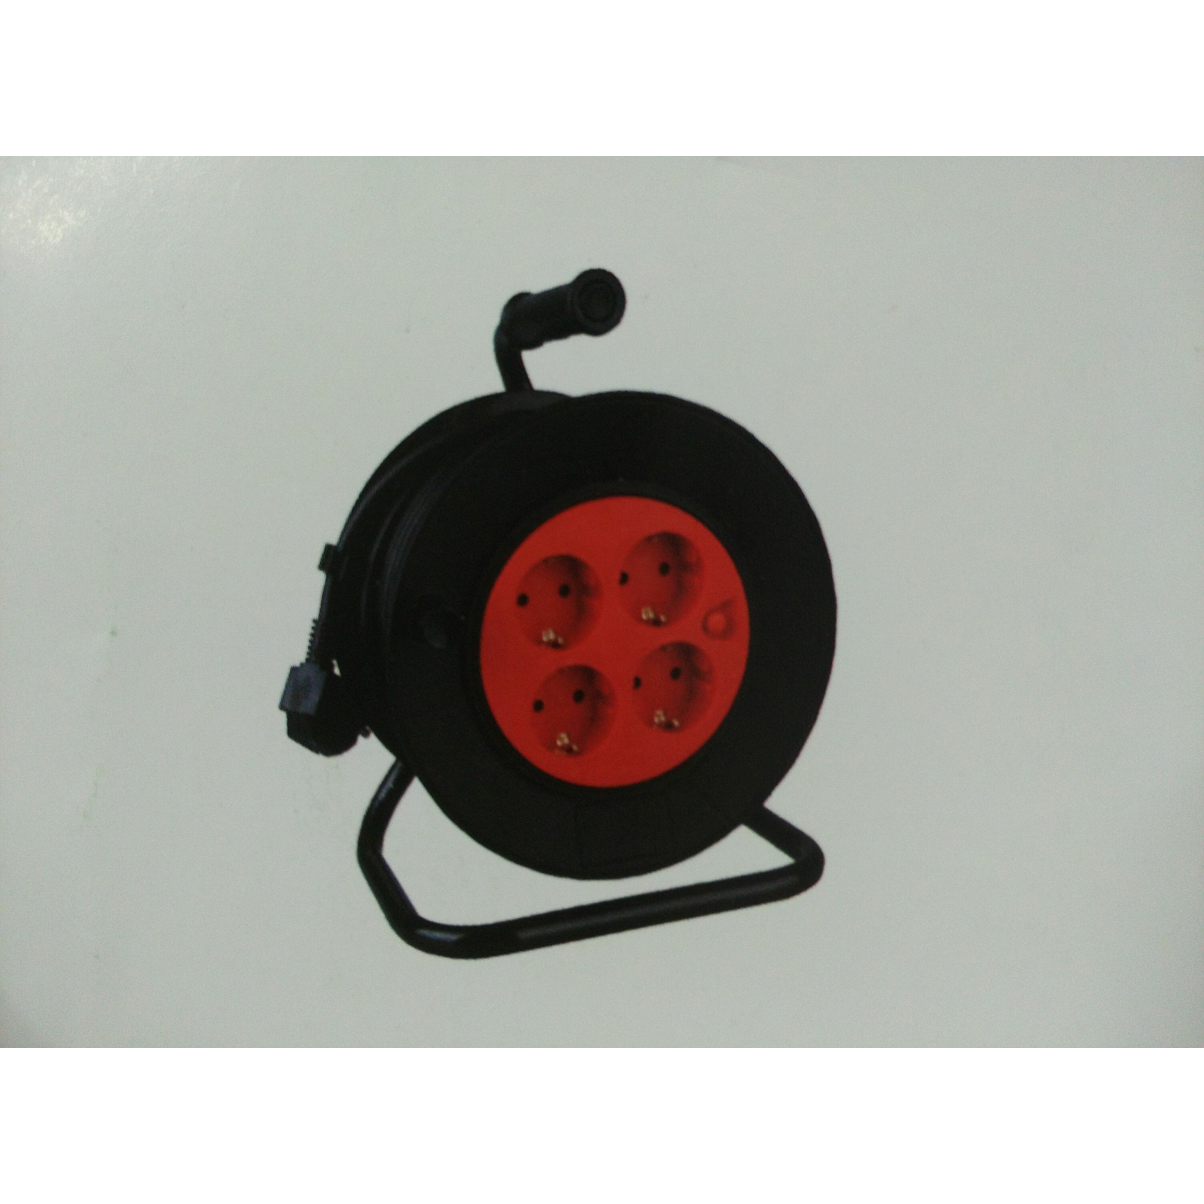 Cable reel with 4 plates socket,HV04VV-F 3G 1,5mm2 50m